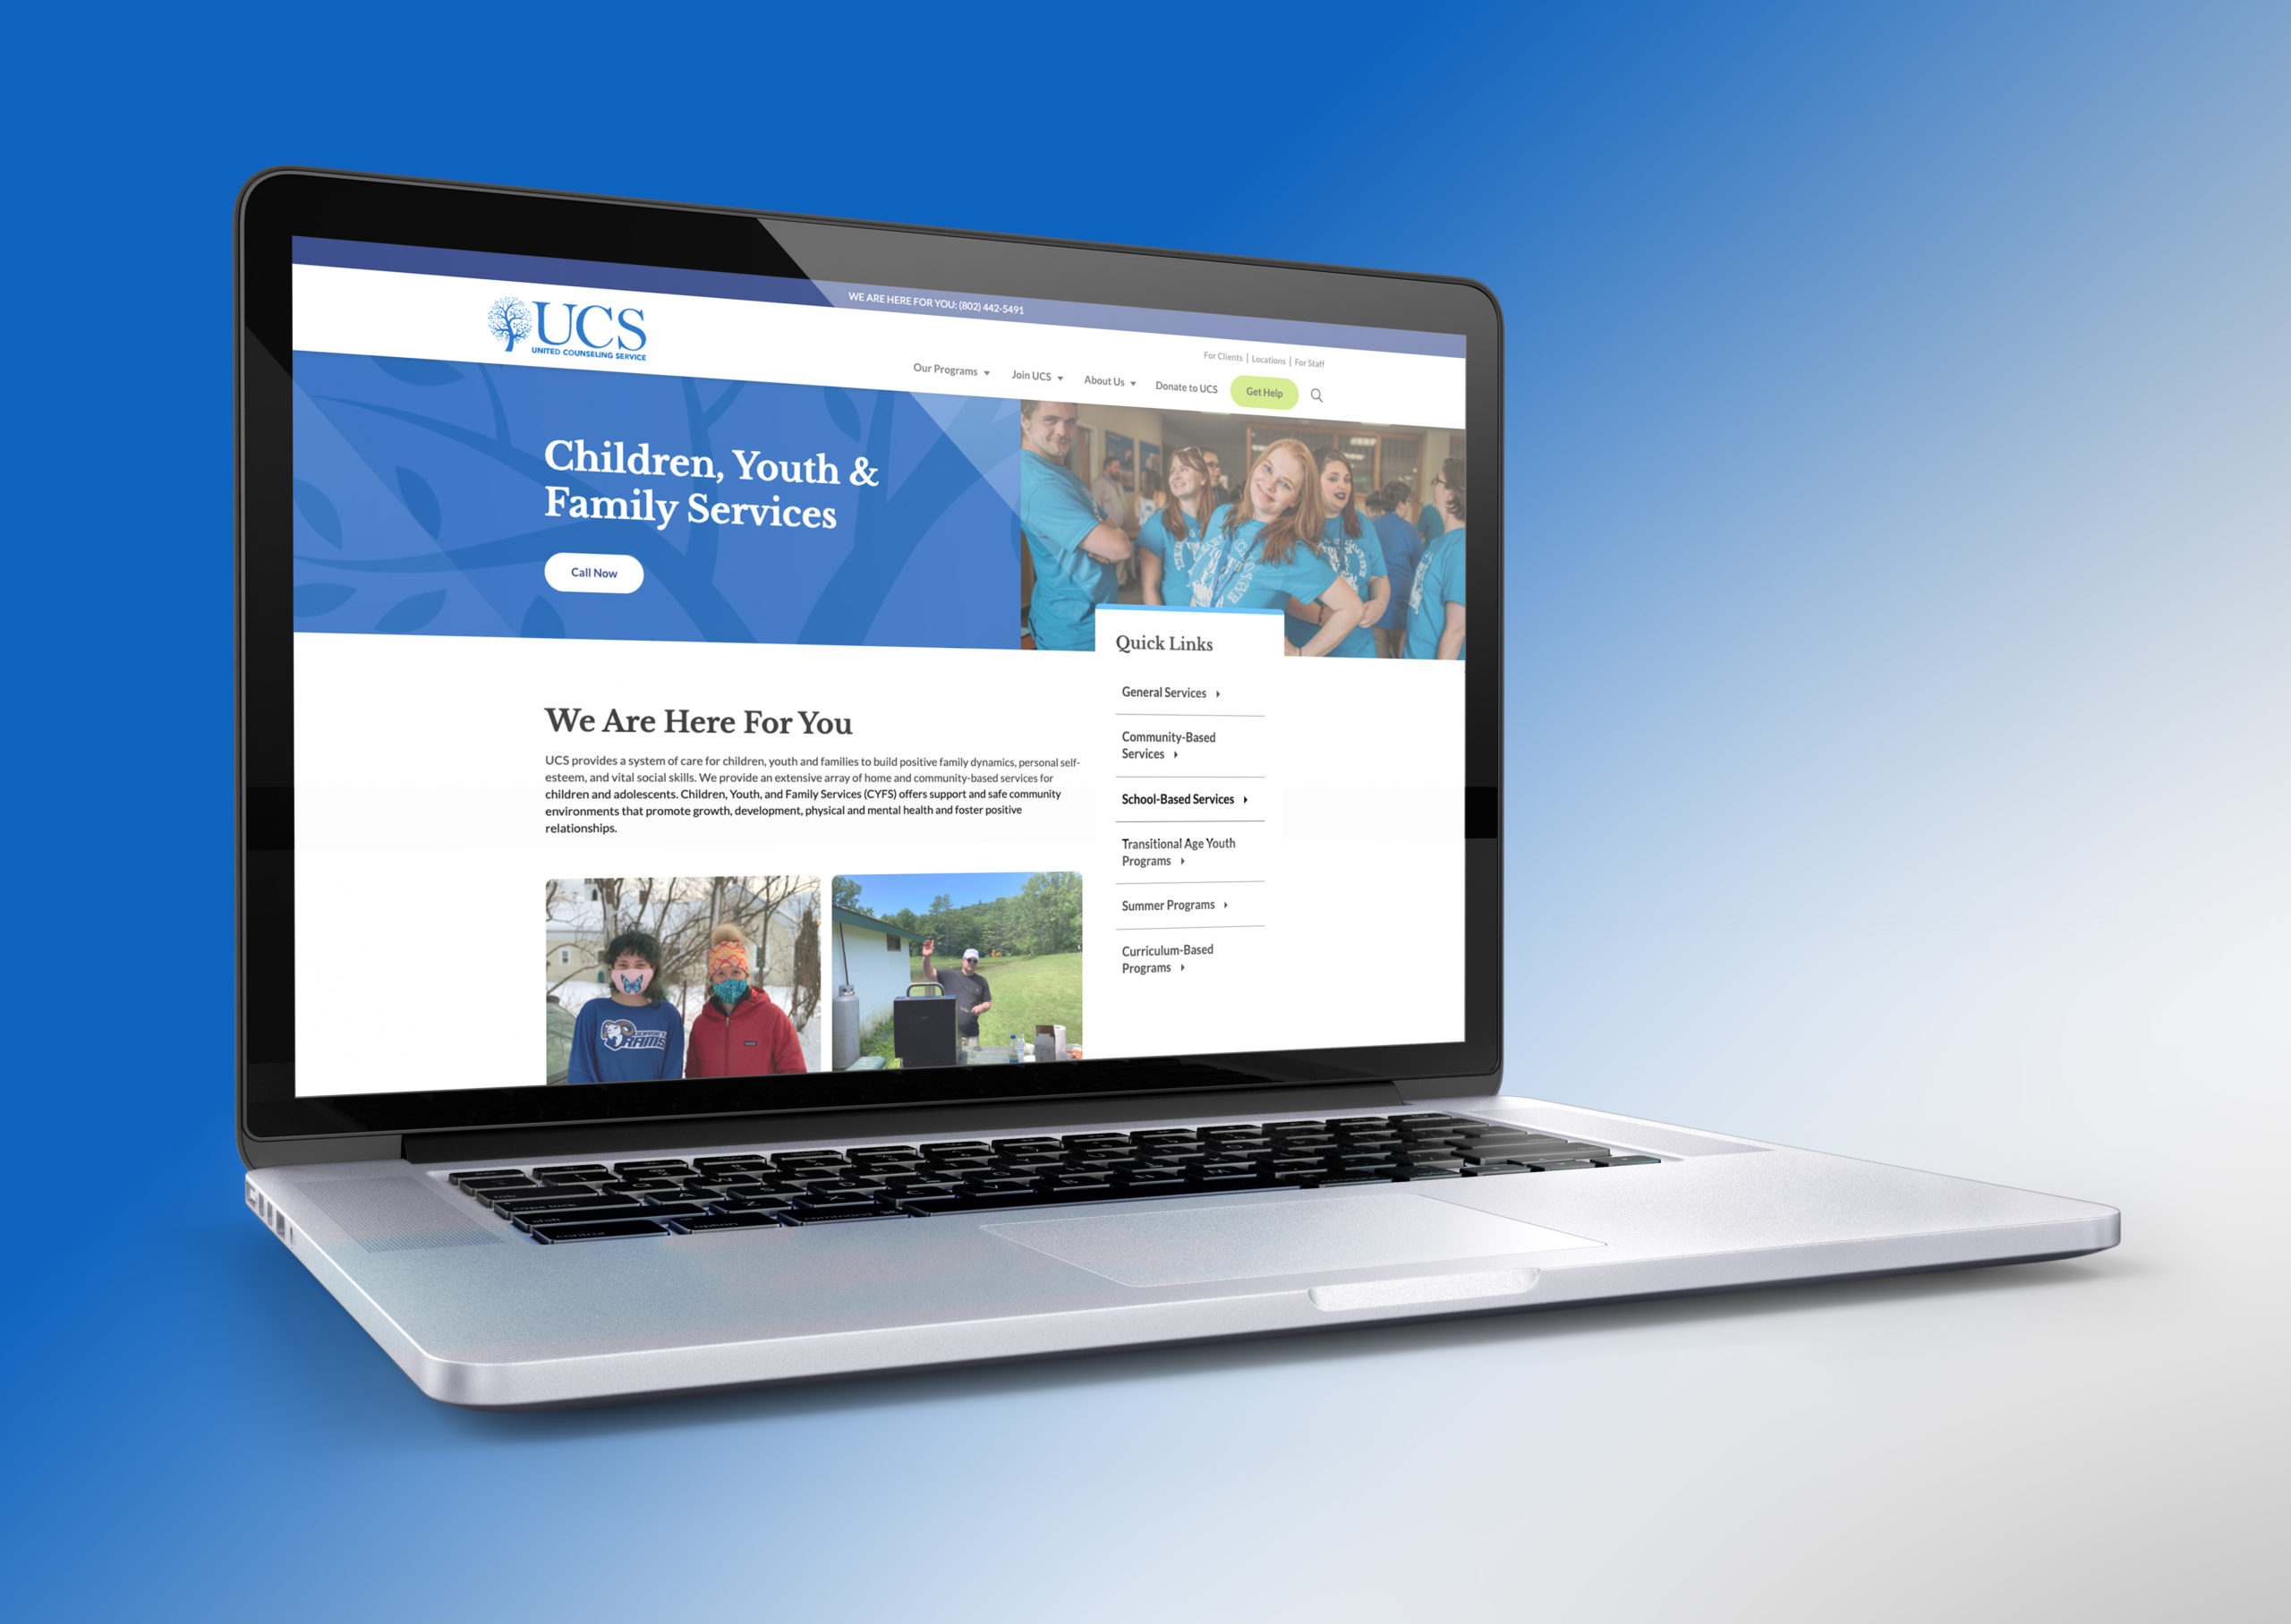 New Children, Youth, & Family Services page on the United Counseling Service website displayed on laptop